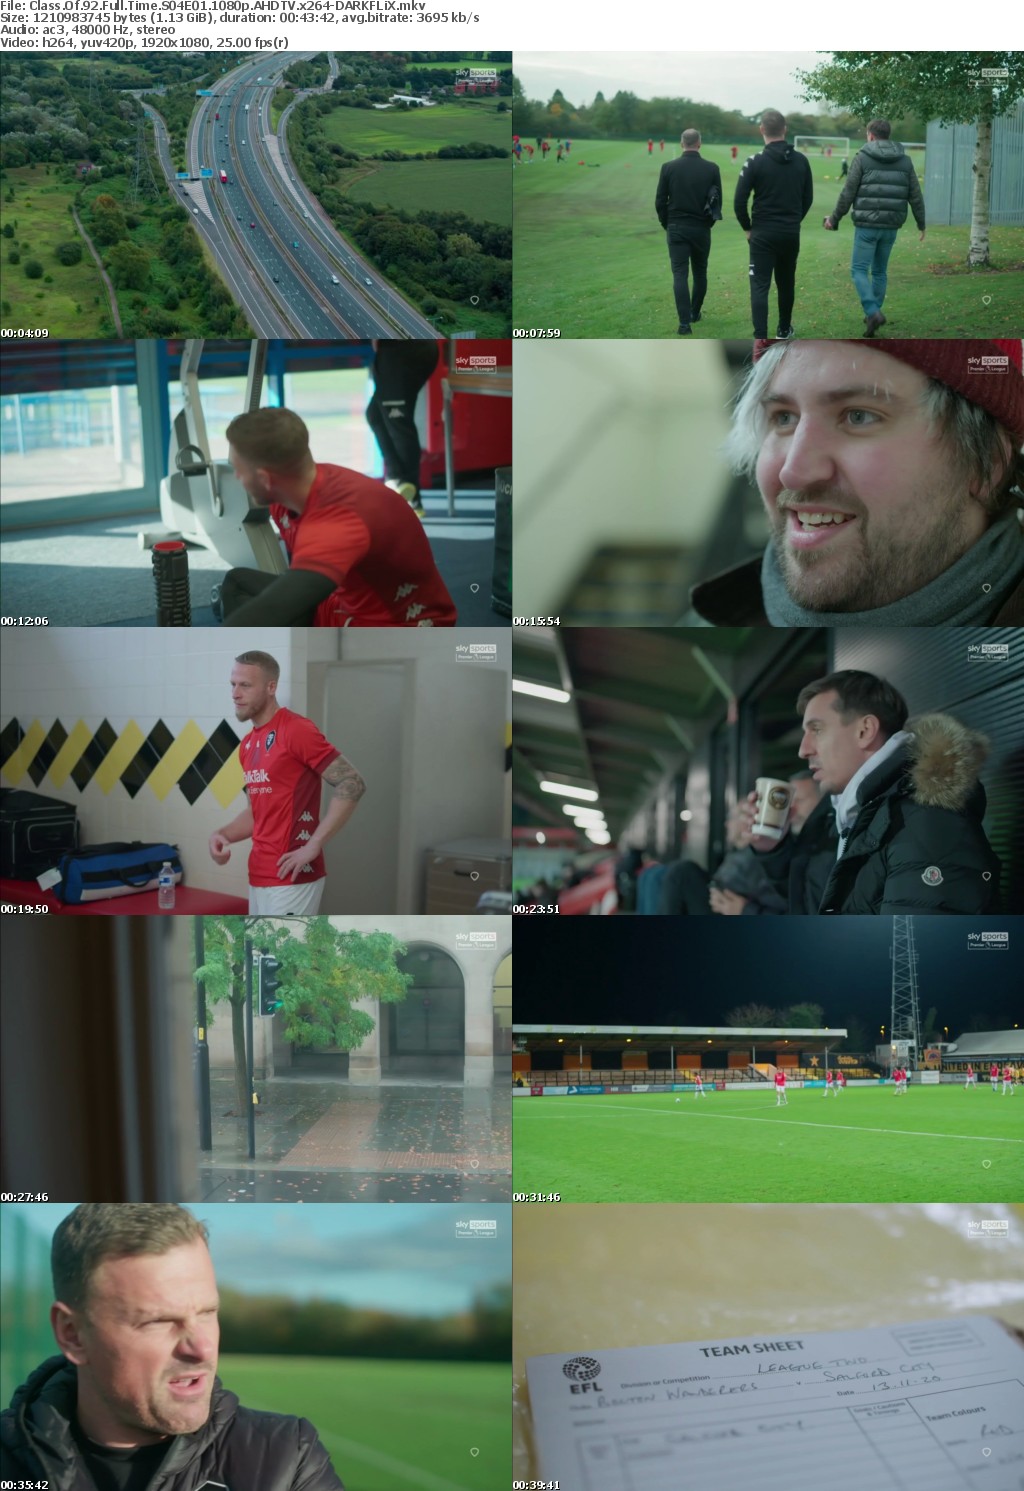 Class Of 92 Full Time S04E01 1080p AHDTV x264-DARKFLiX